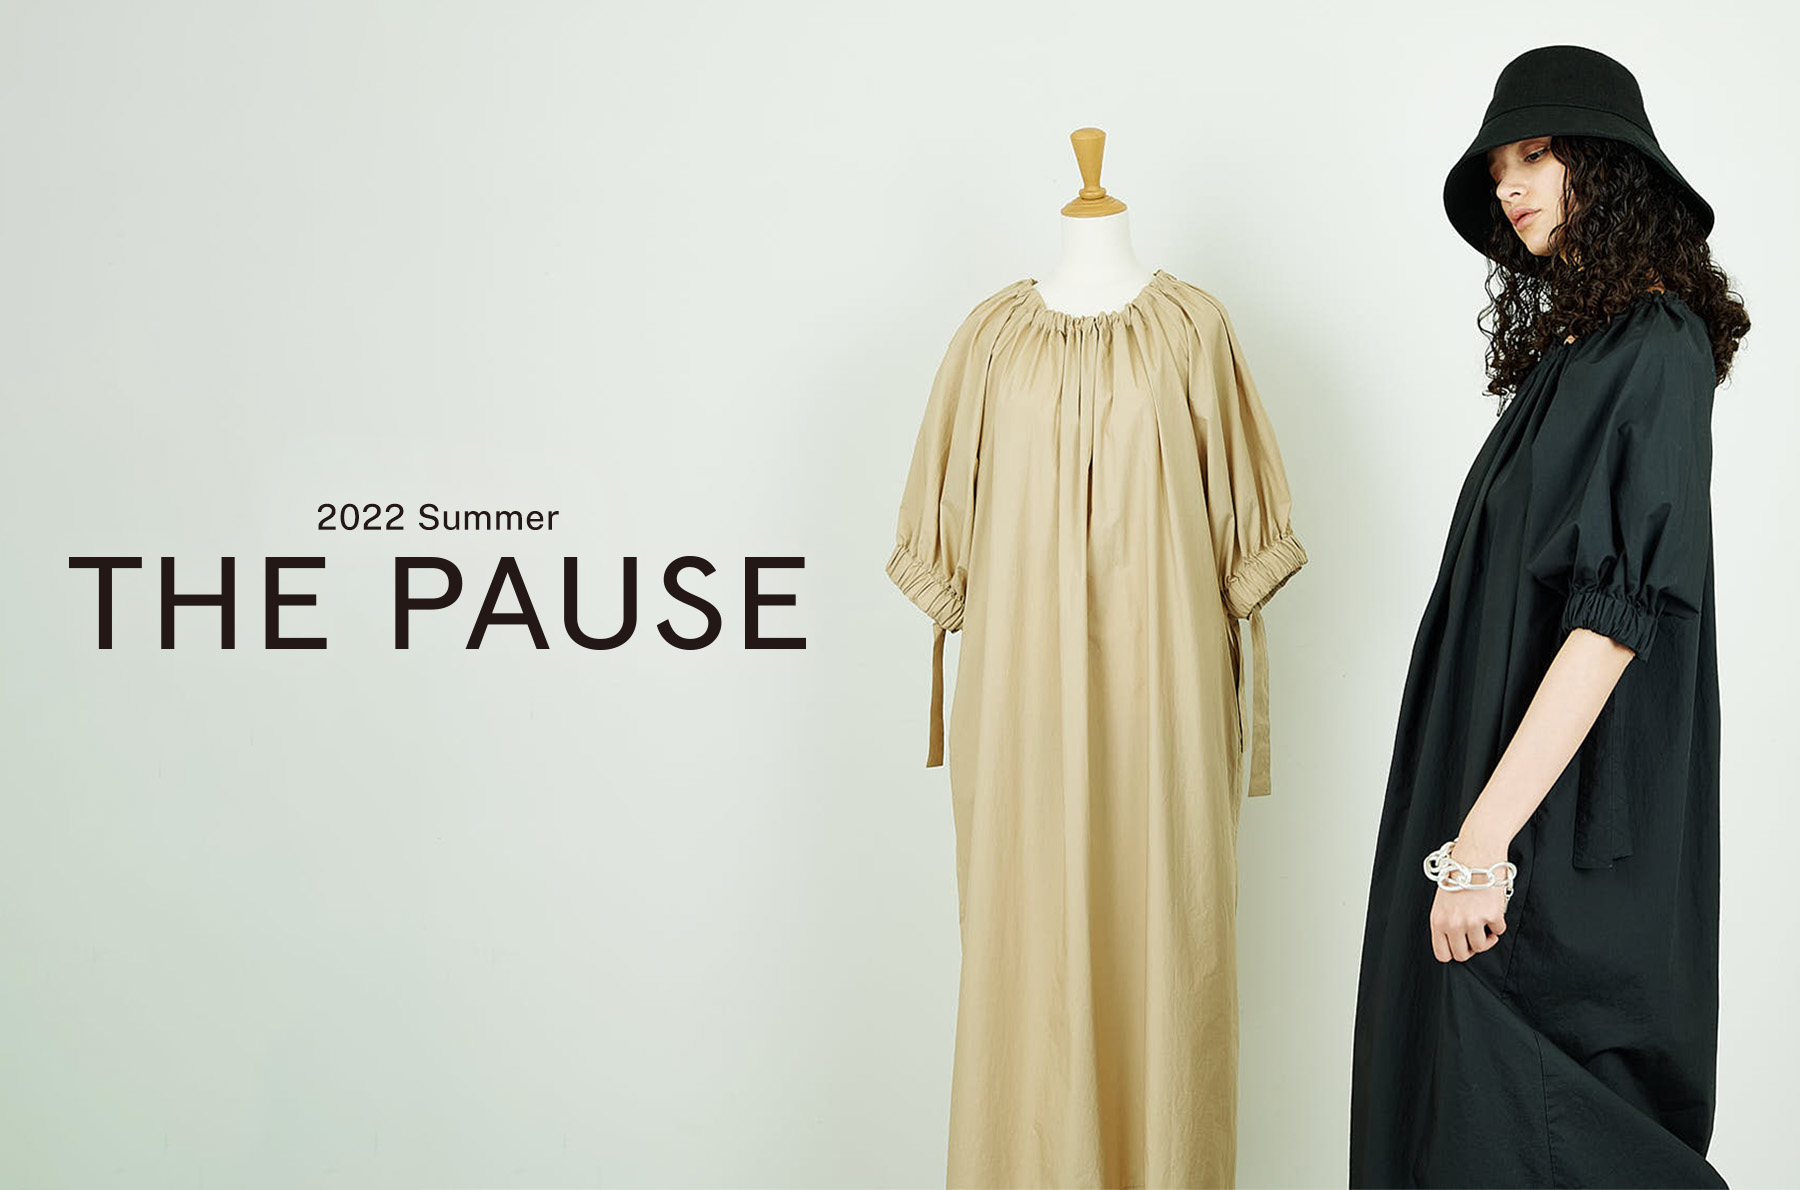 【THE PAUSE】2022 Summer